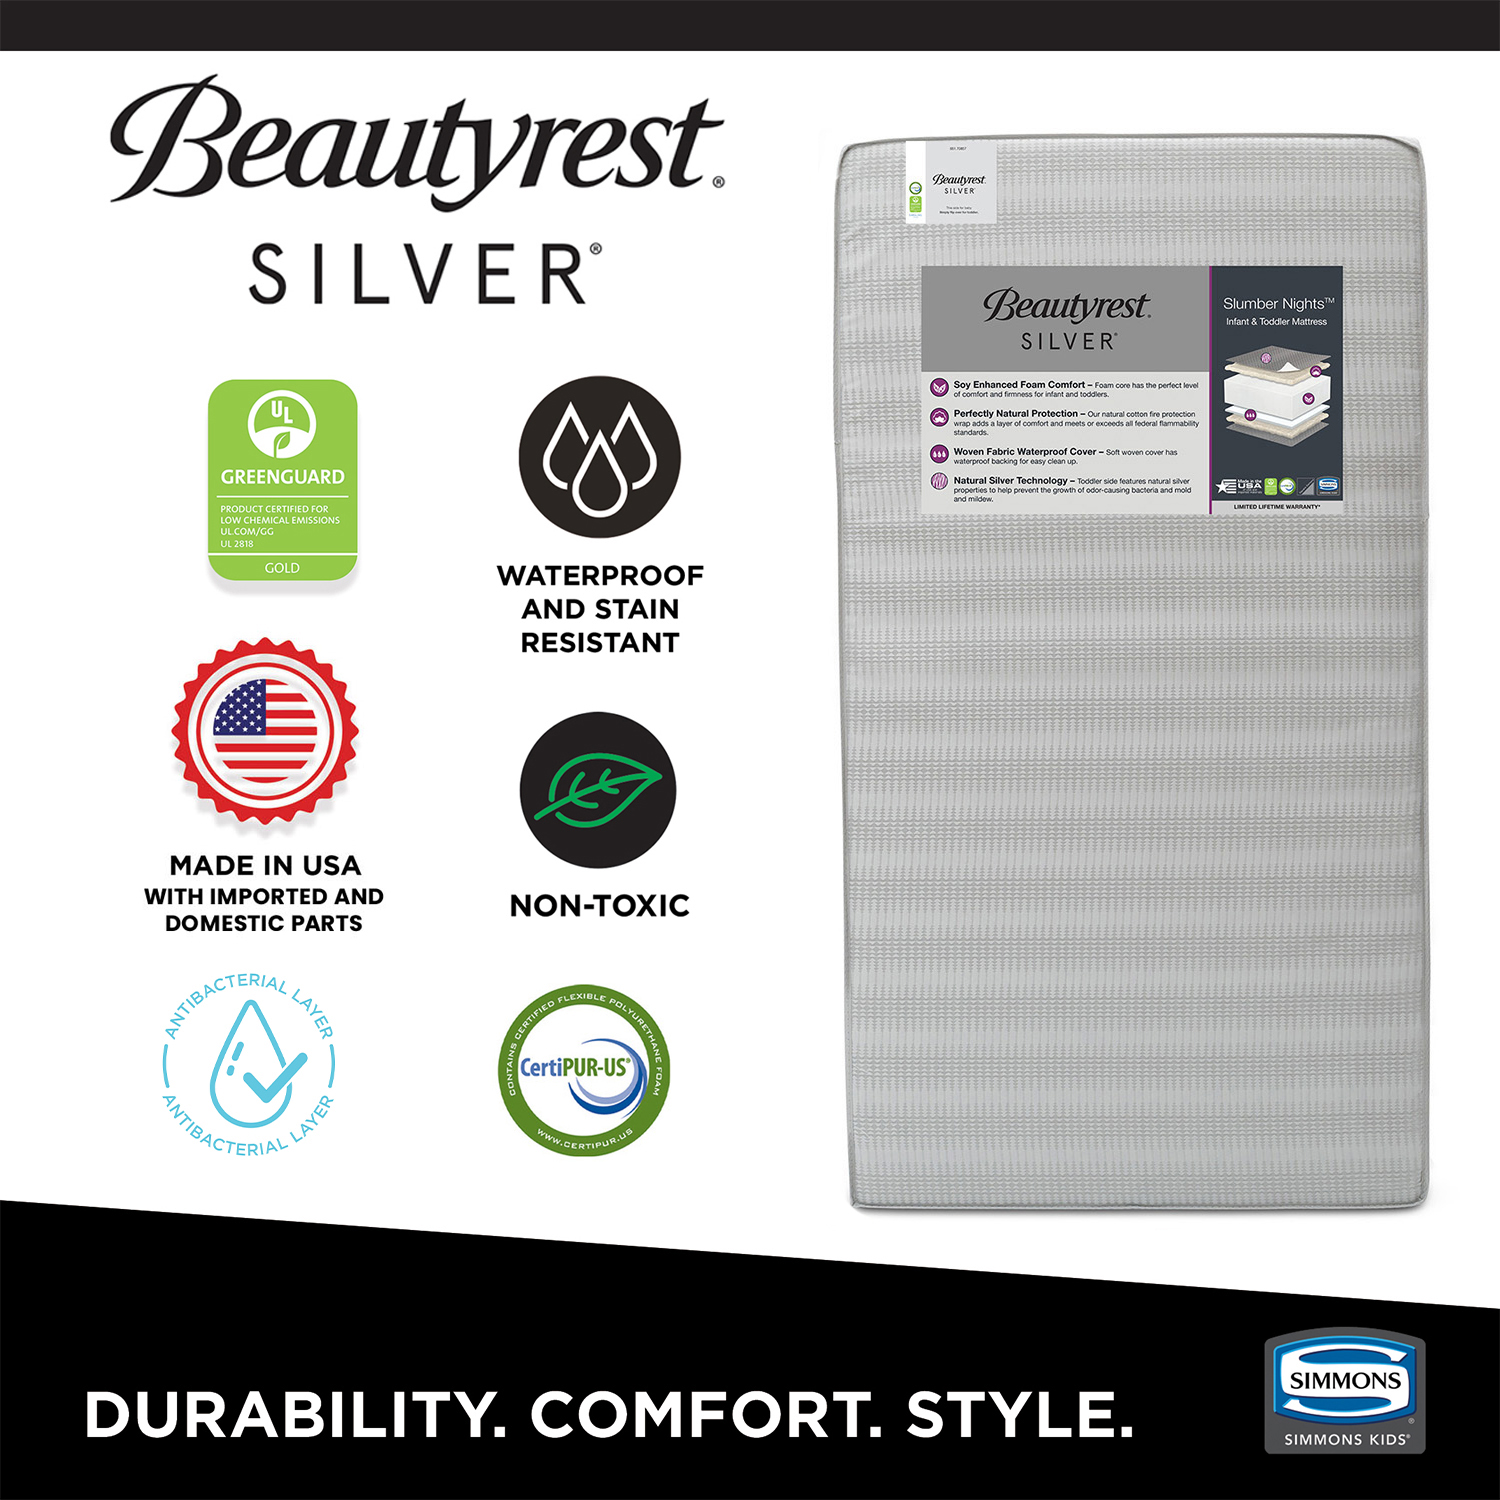 Beautyrest Silver Slumber Nights 2-Stage Antimicrobial Crib & Toddler Mattress, Soy Foam Core - image 3 of 10